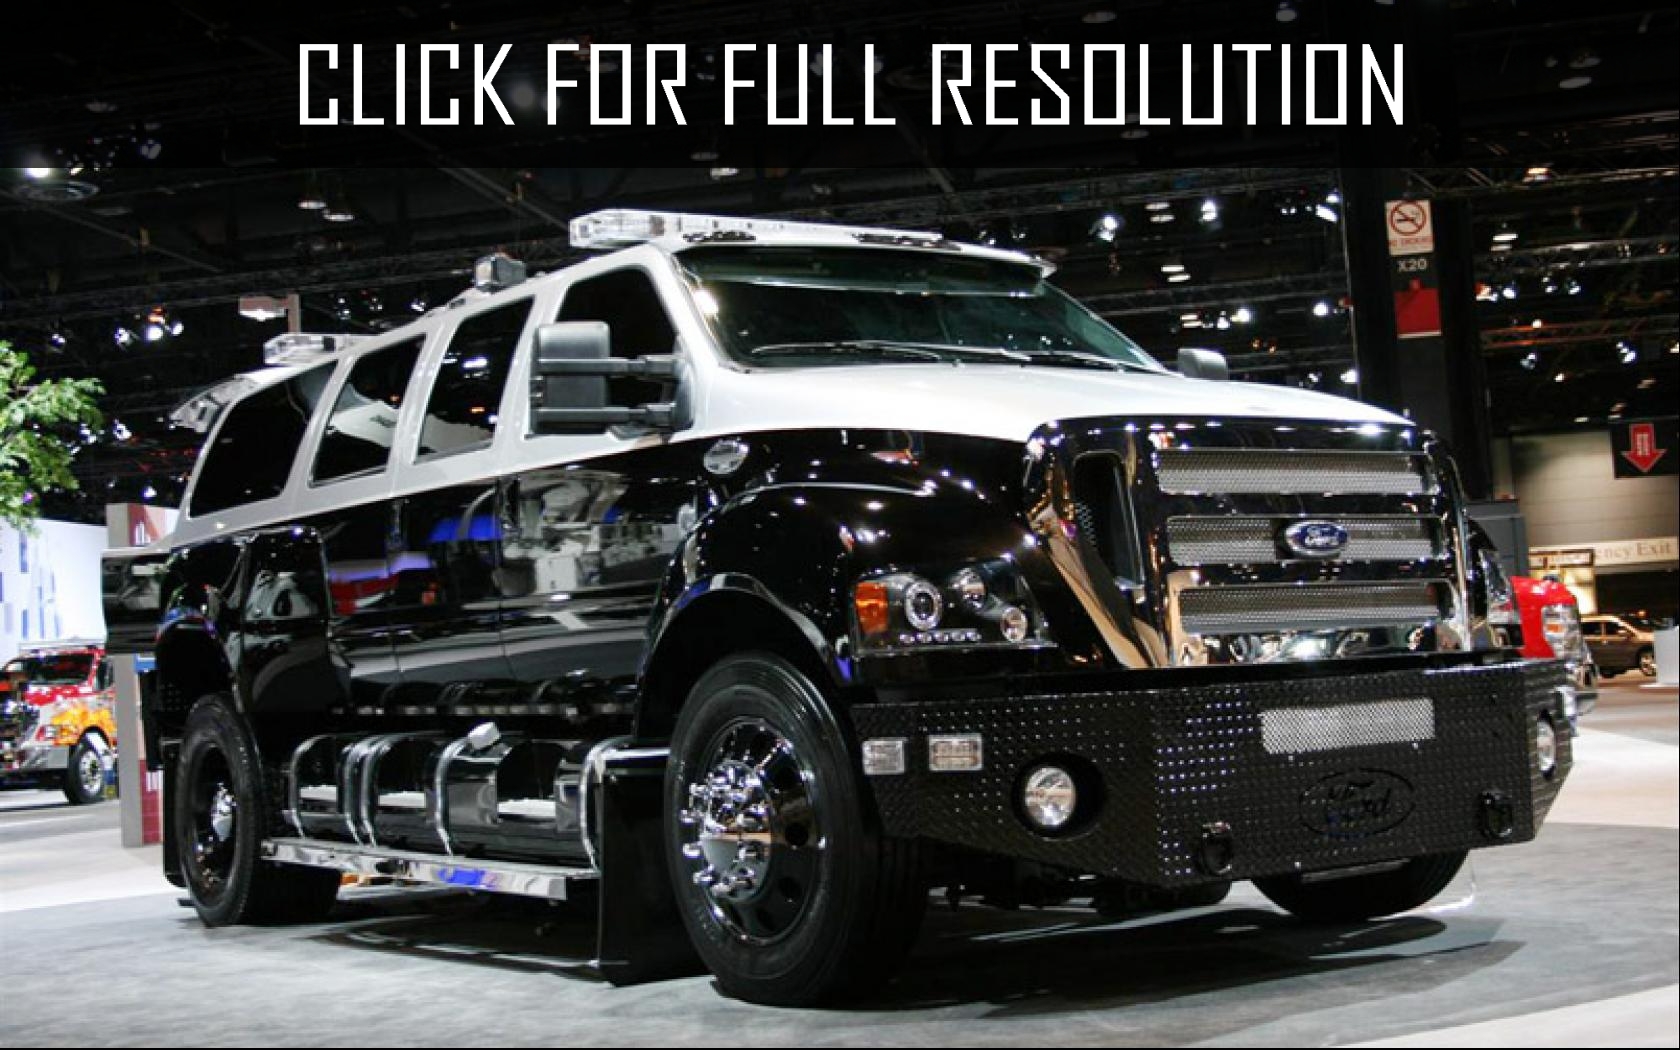 Ford F650